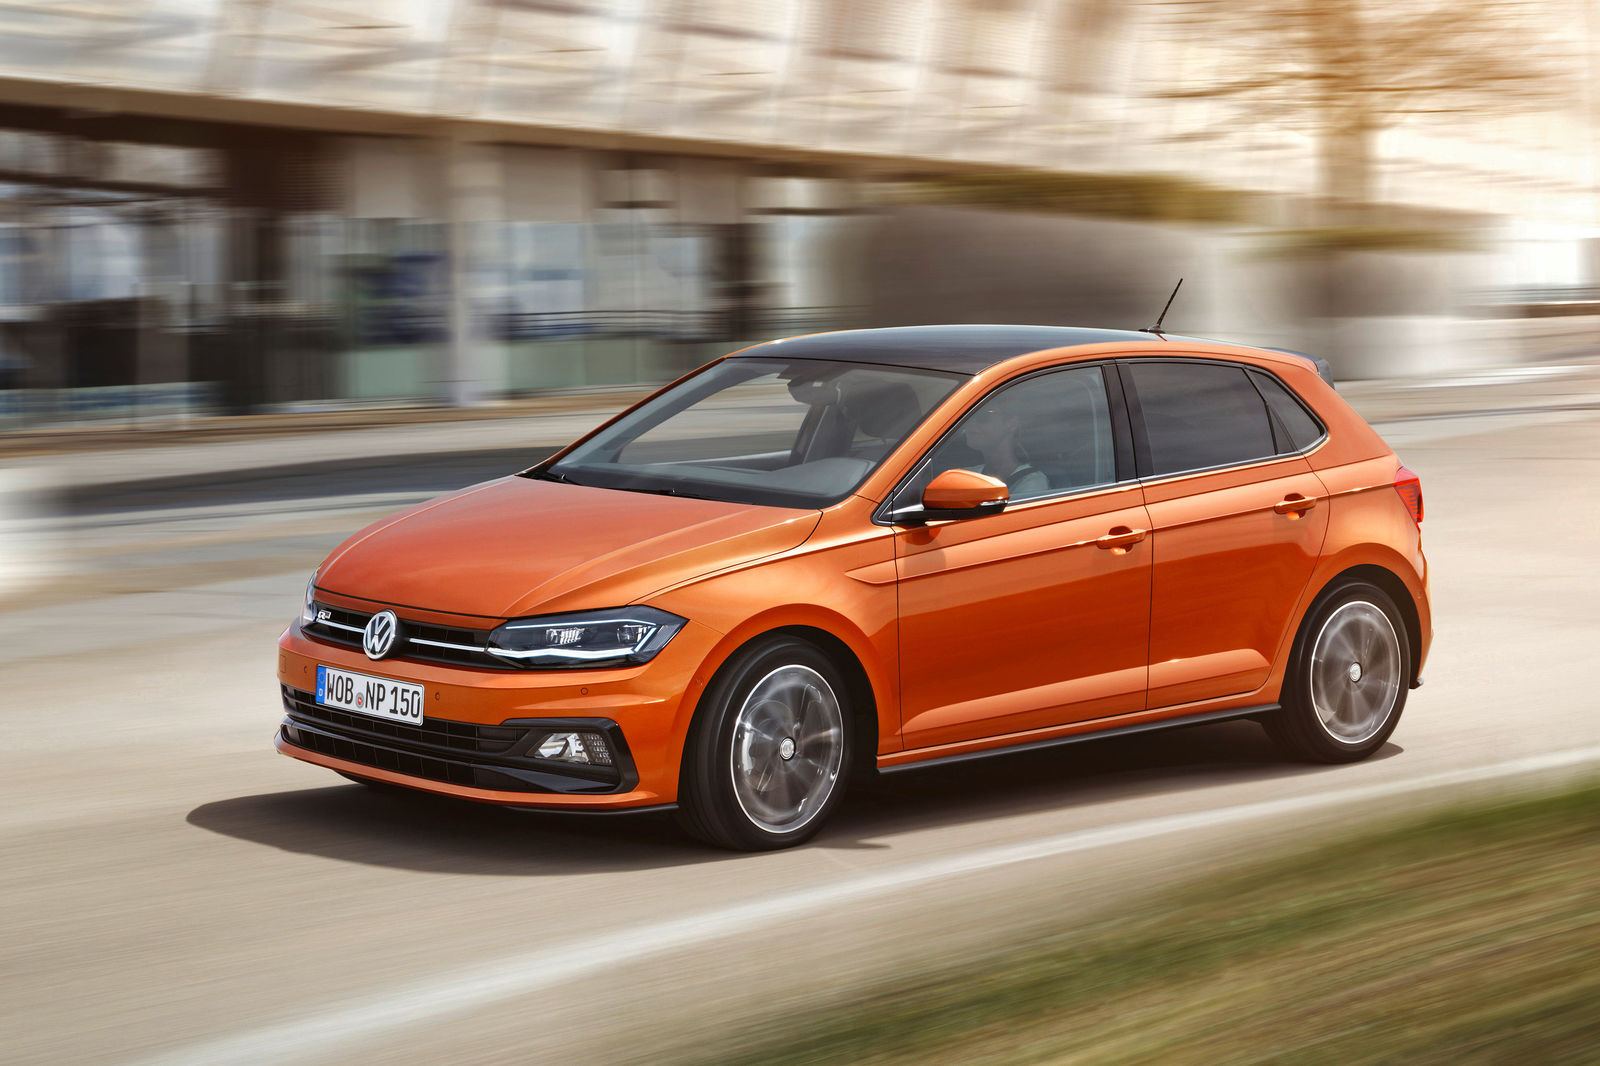 2019 Volkswagen Polo - ChooseMyCar - Find The Best Deal on a Cheap